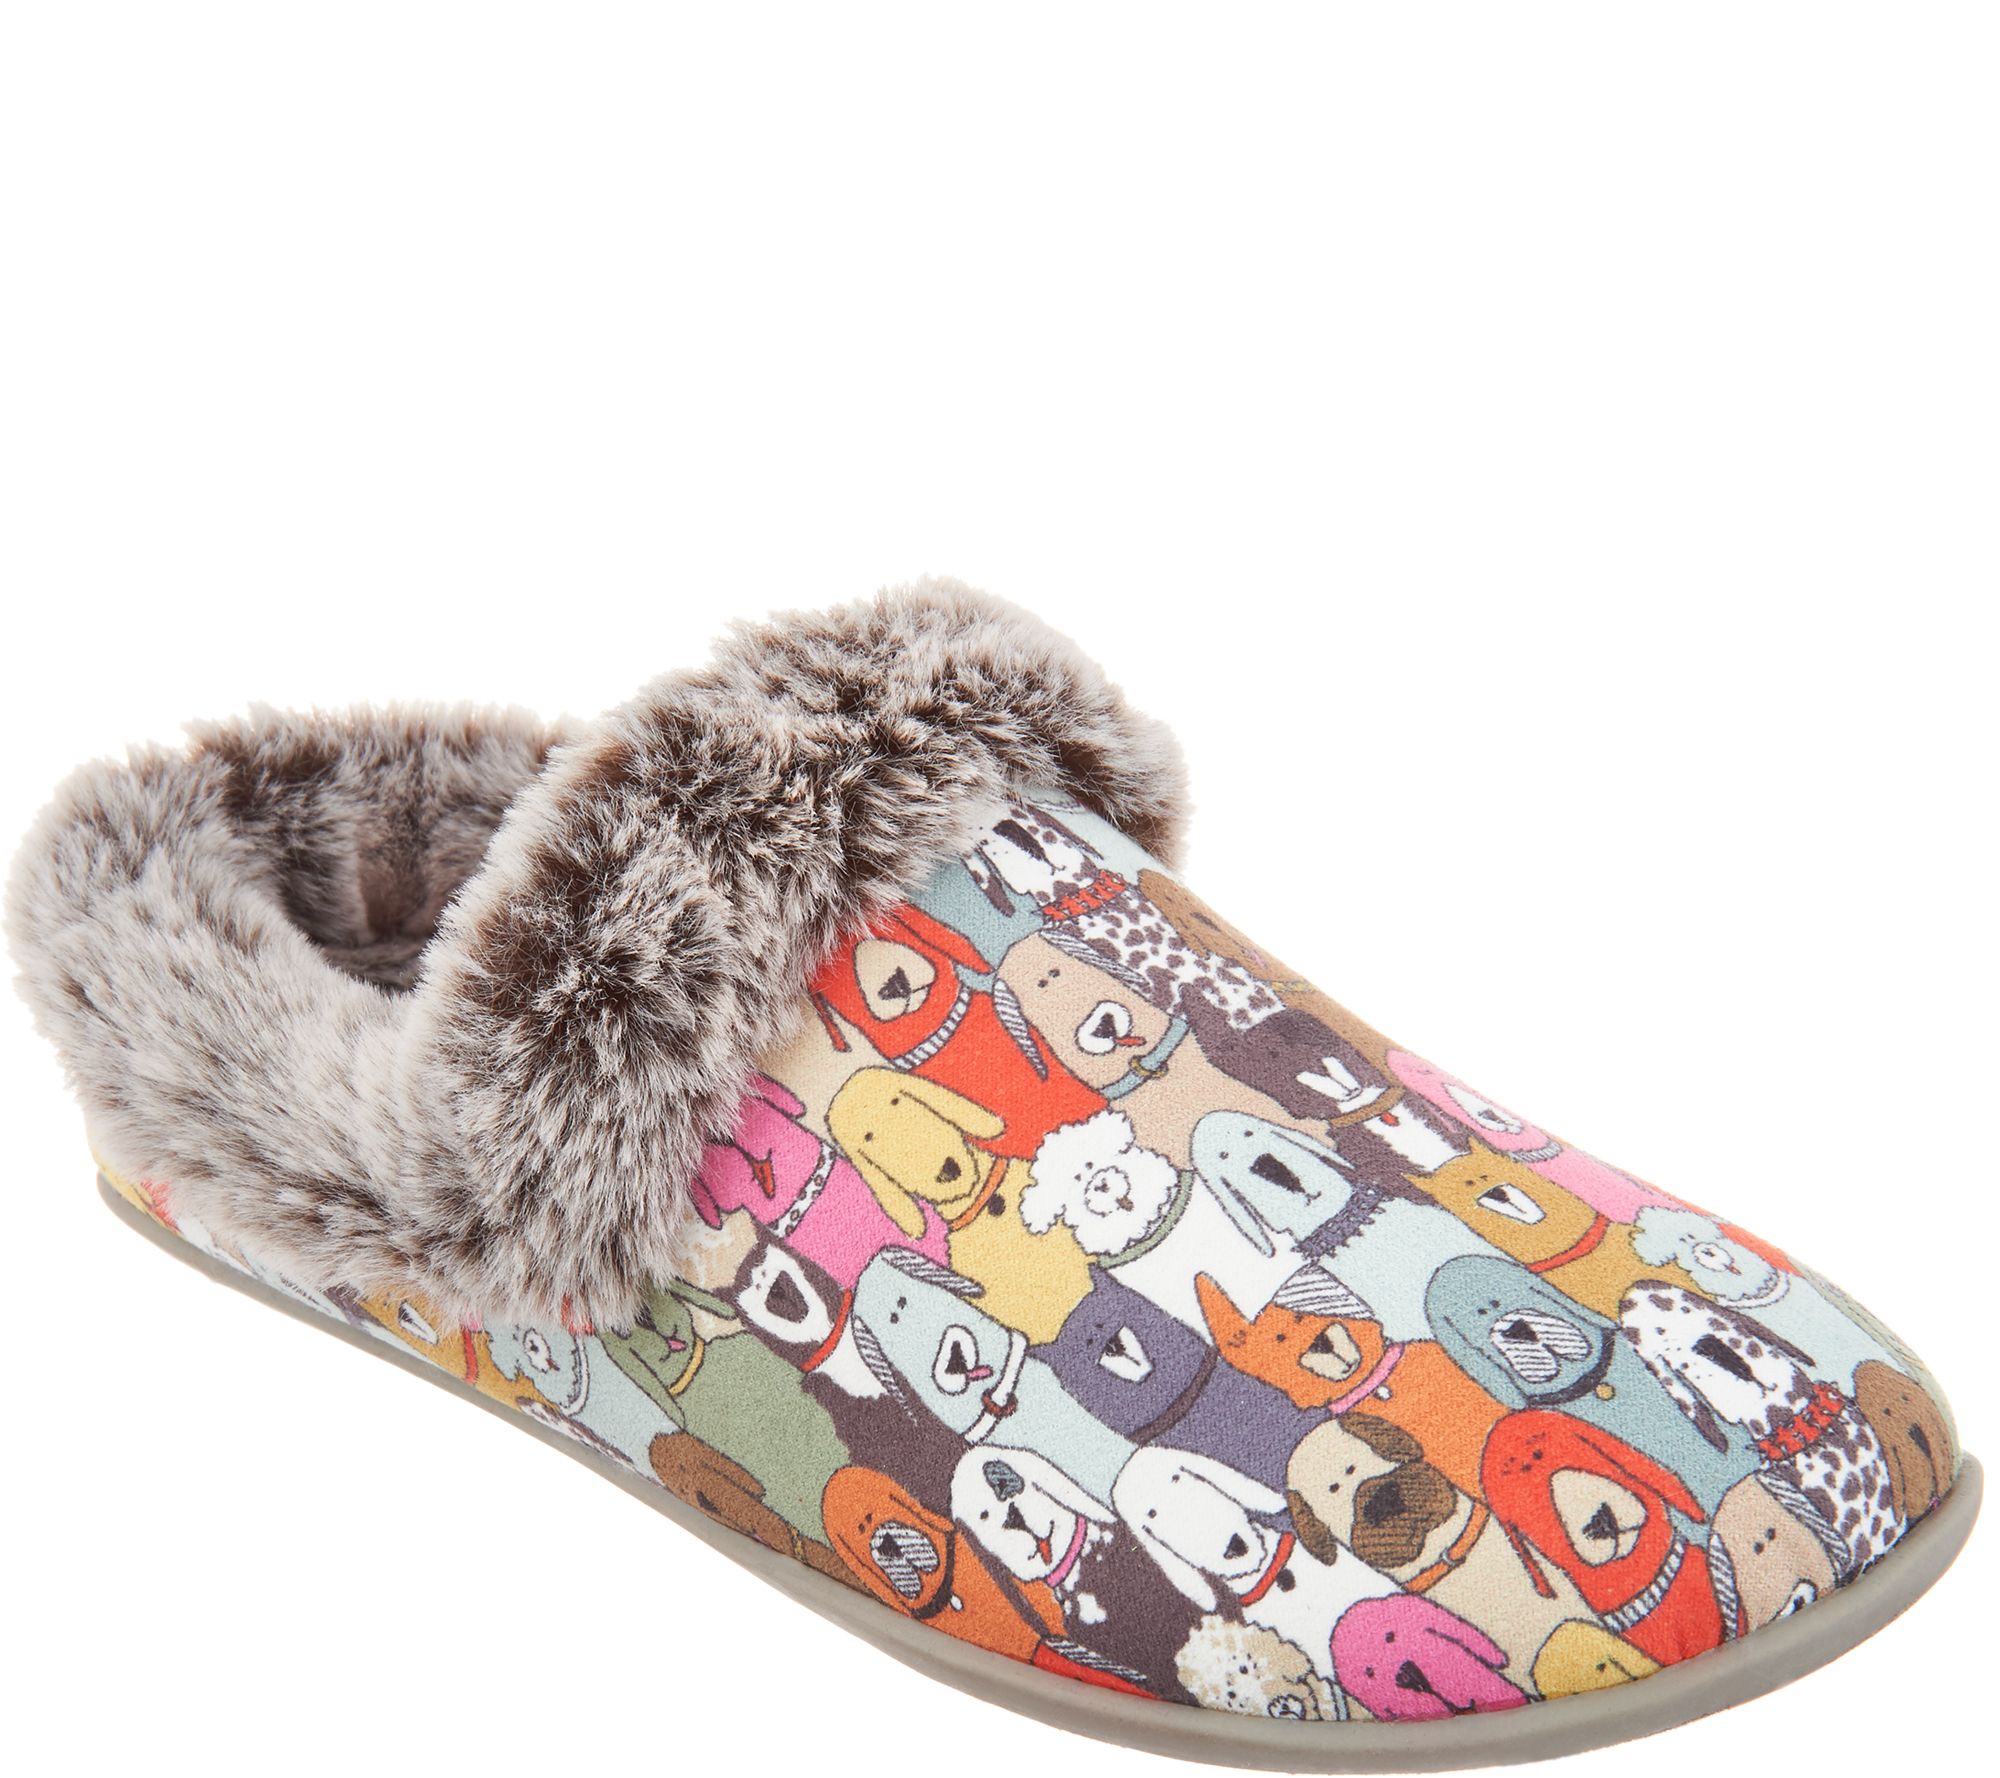 Skechers BOBs Clog Slippers - Wag 